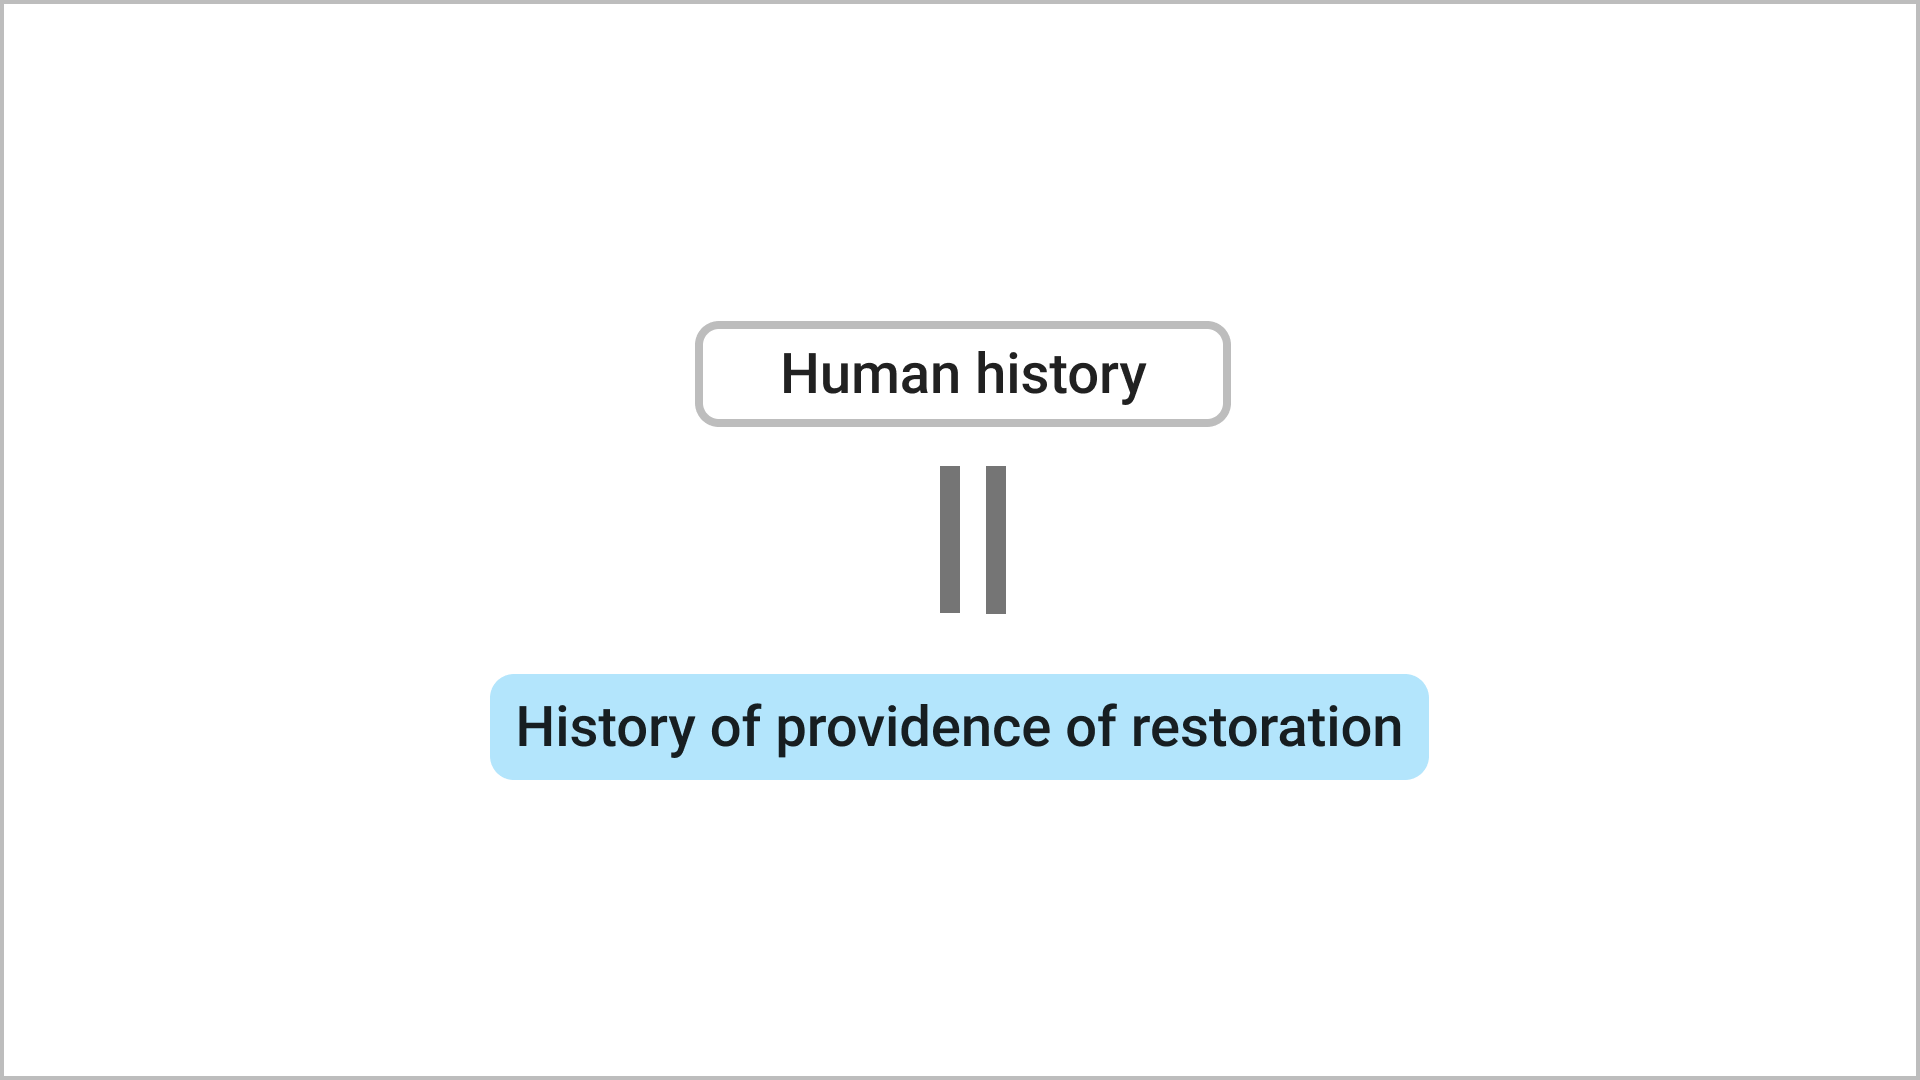 Human History is the History of the Providence of Restoration